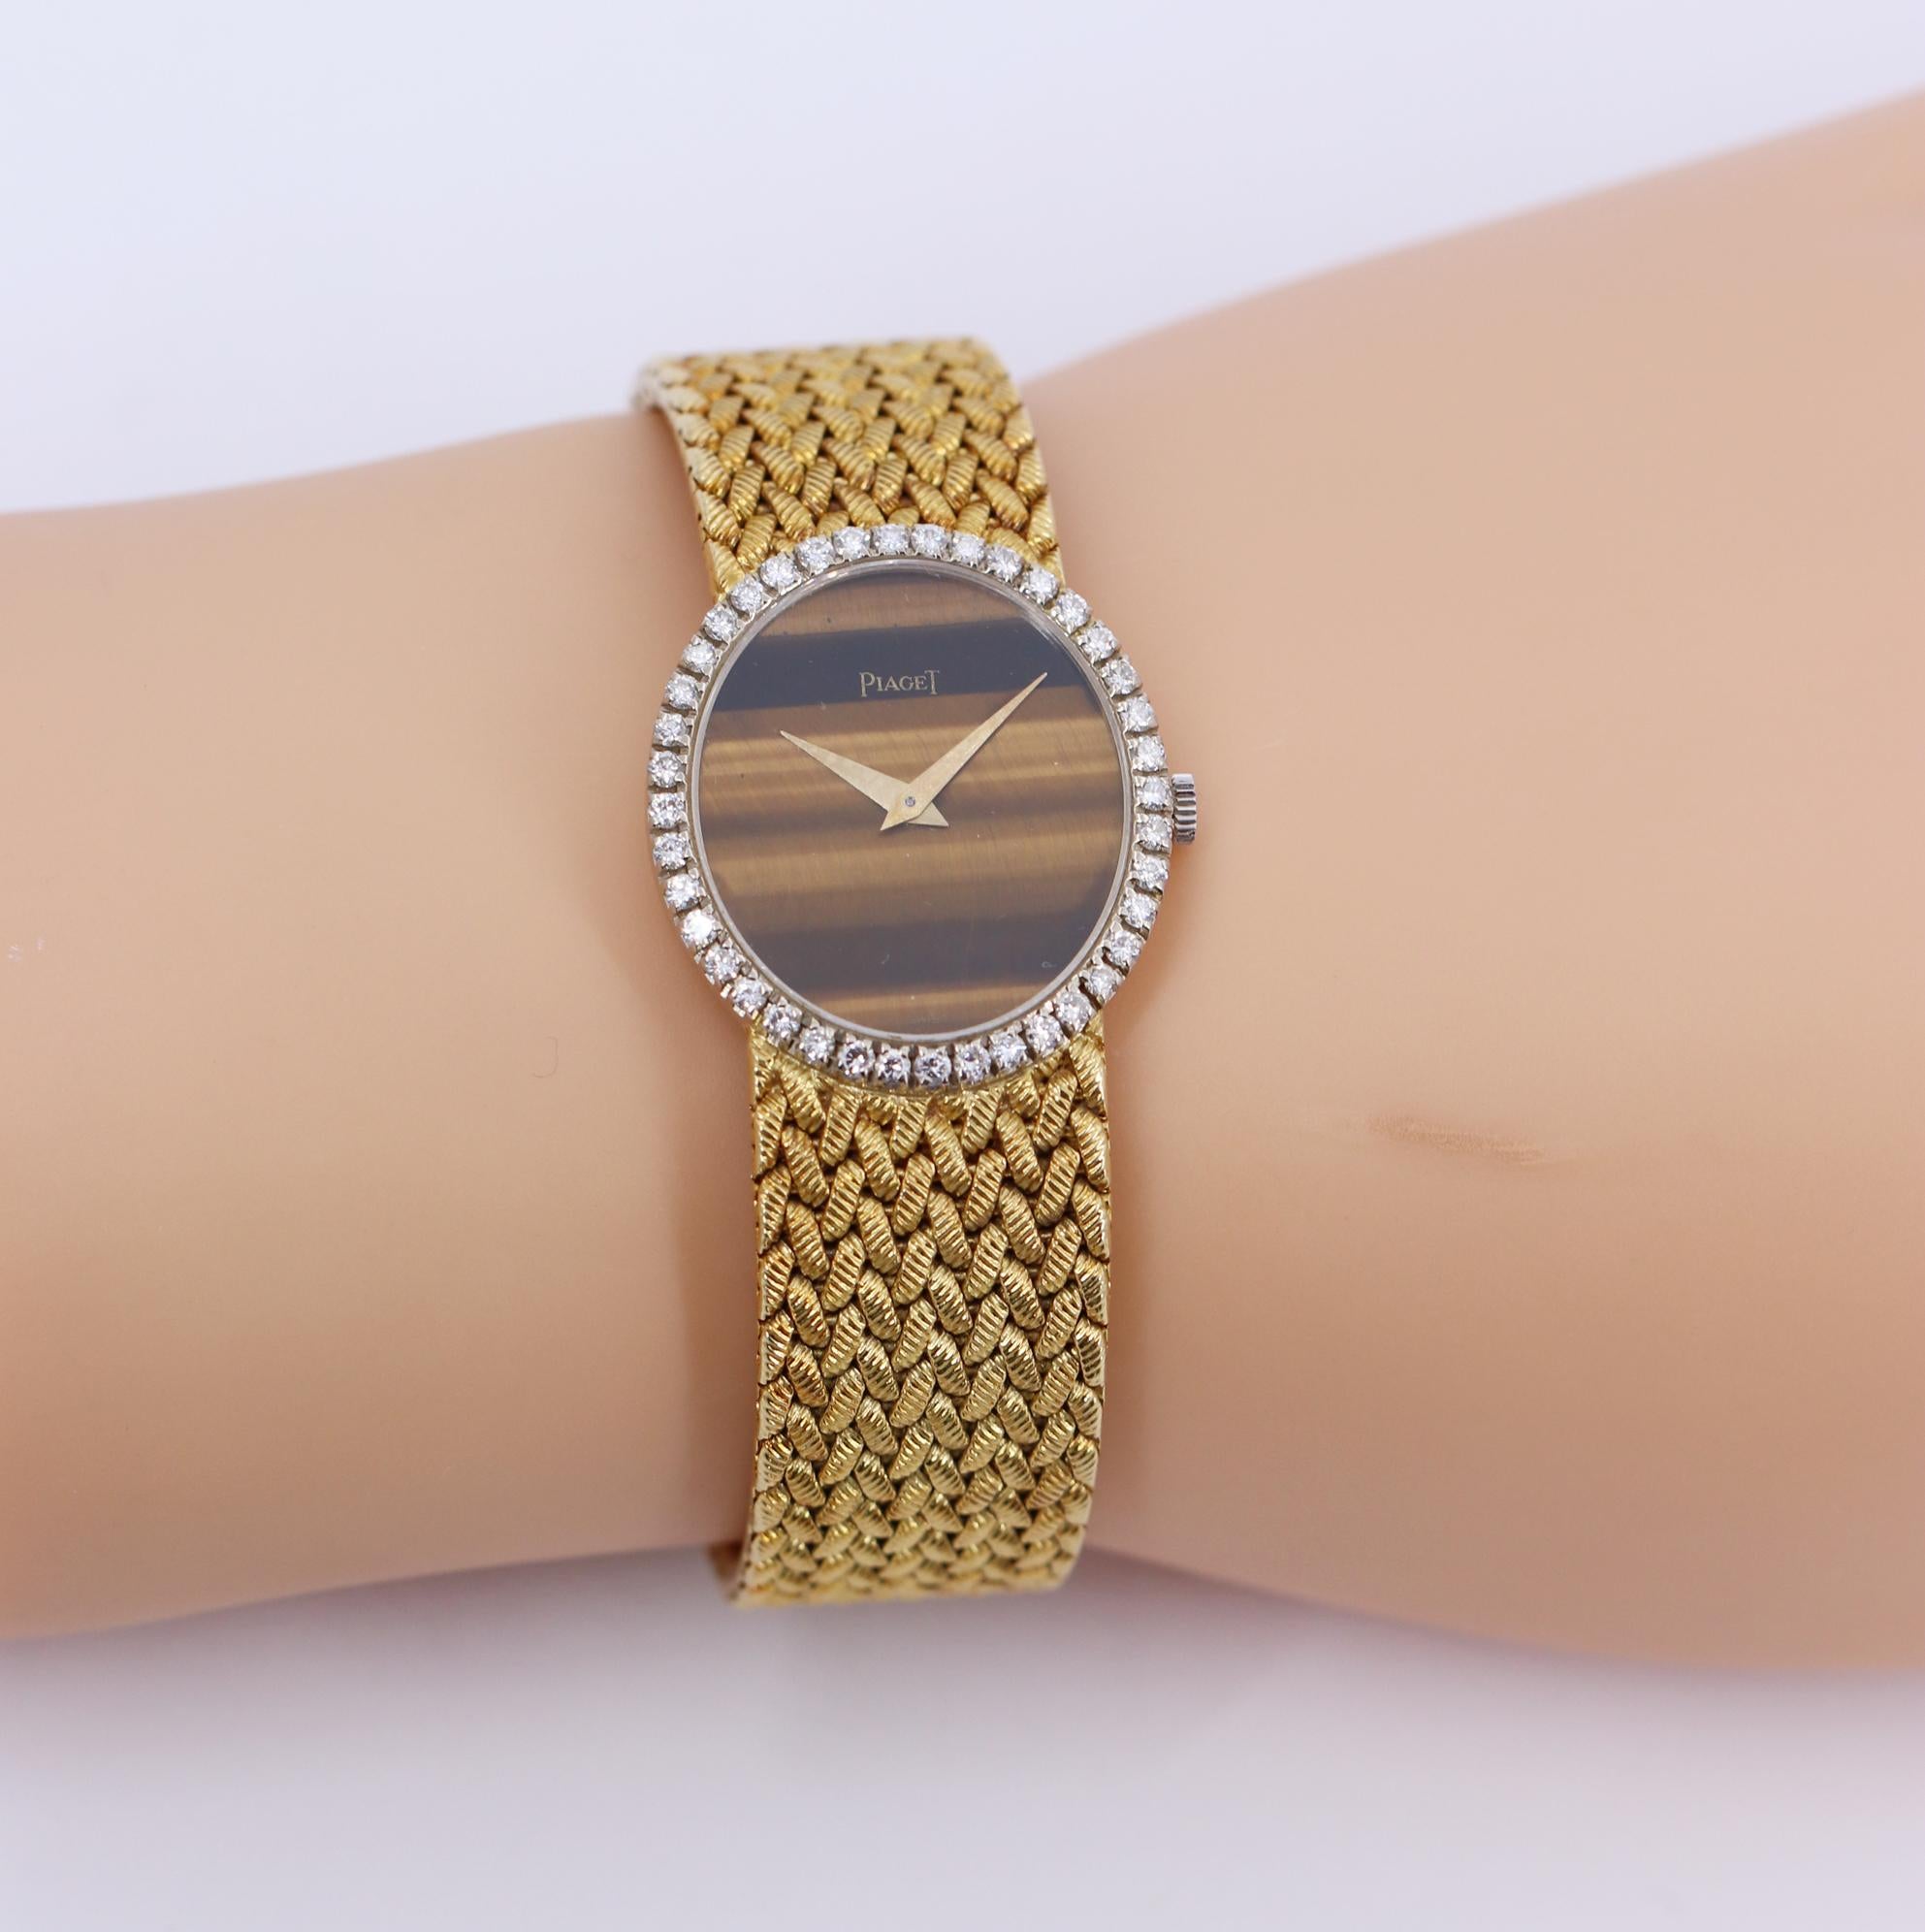 A ladies, 18K yellow gold Piaget wristwatch centered around a tiger's eye dial measuring 23mm by 20mm. Surrounding the dial are 40 round brilliant cut diamonds weighing 1ct total approximate weight, of overall F/G color and VVS2/VS1 clarity. The